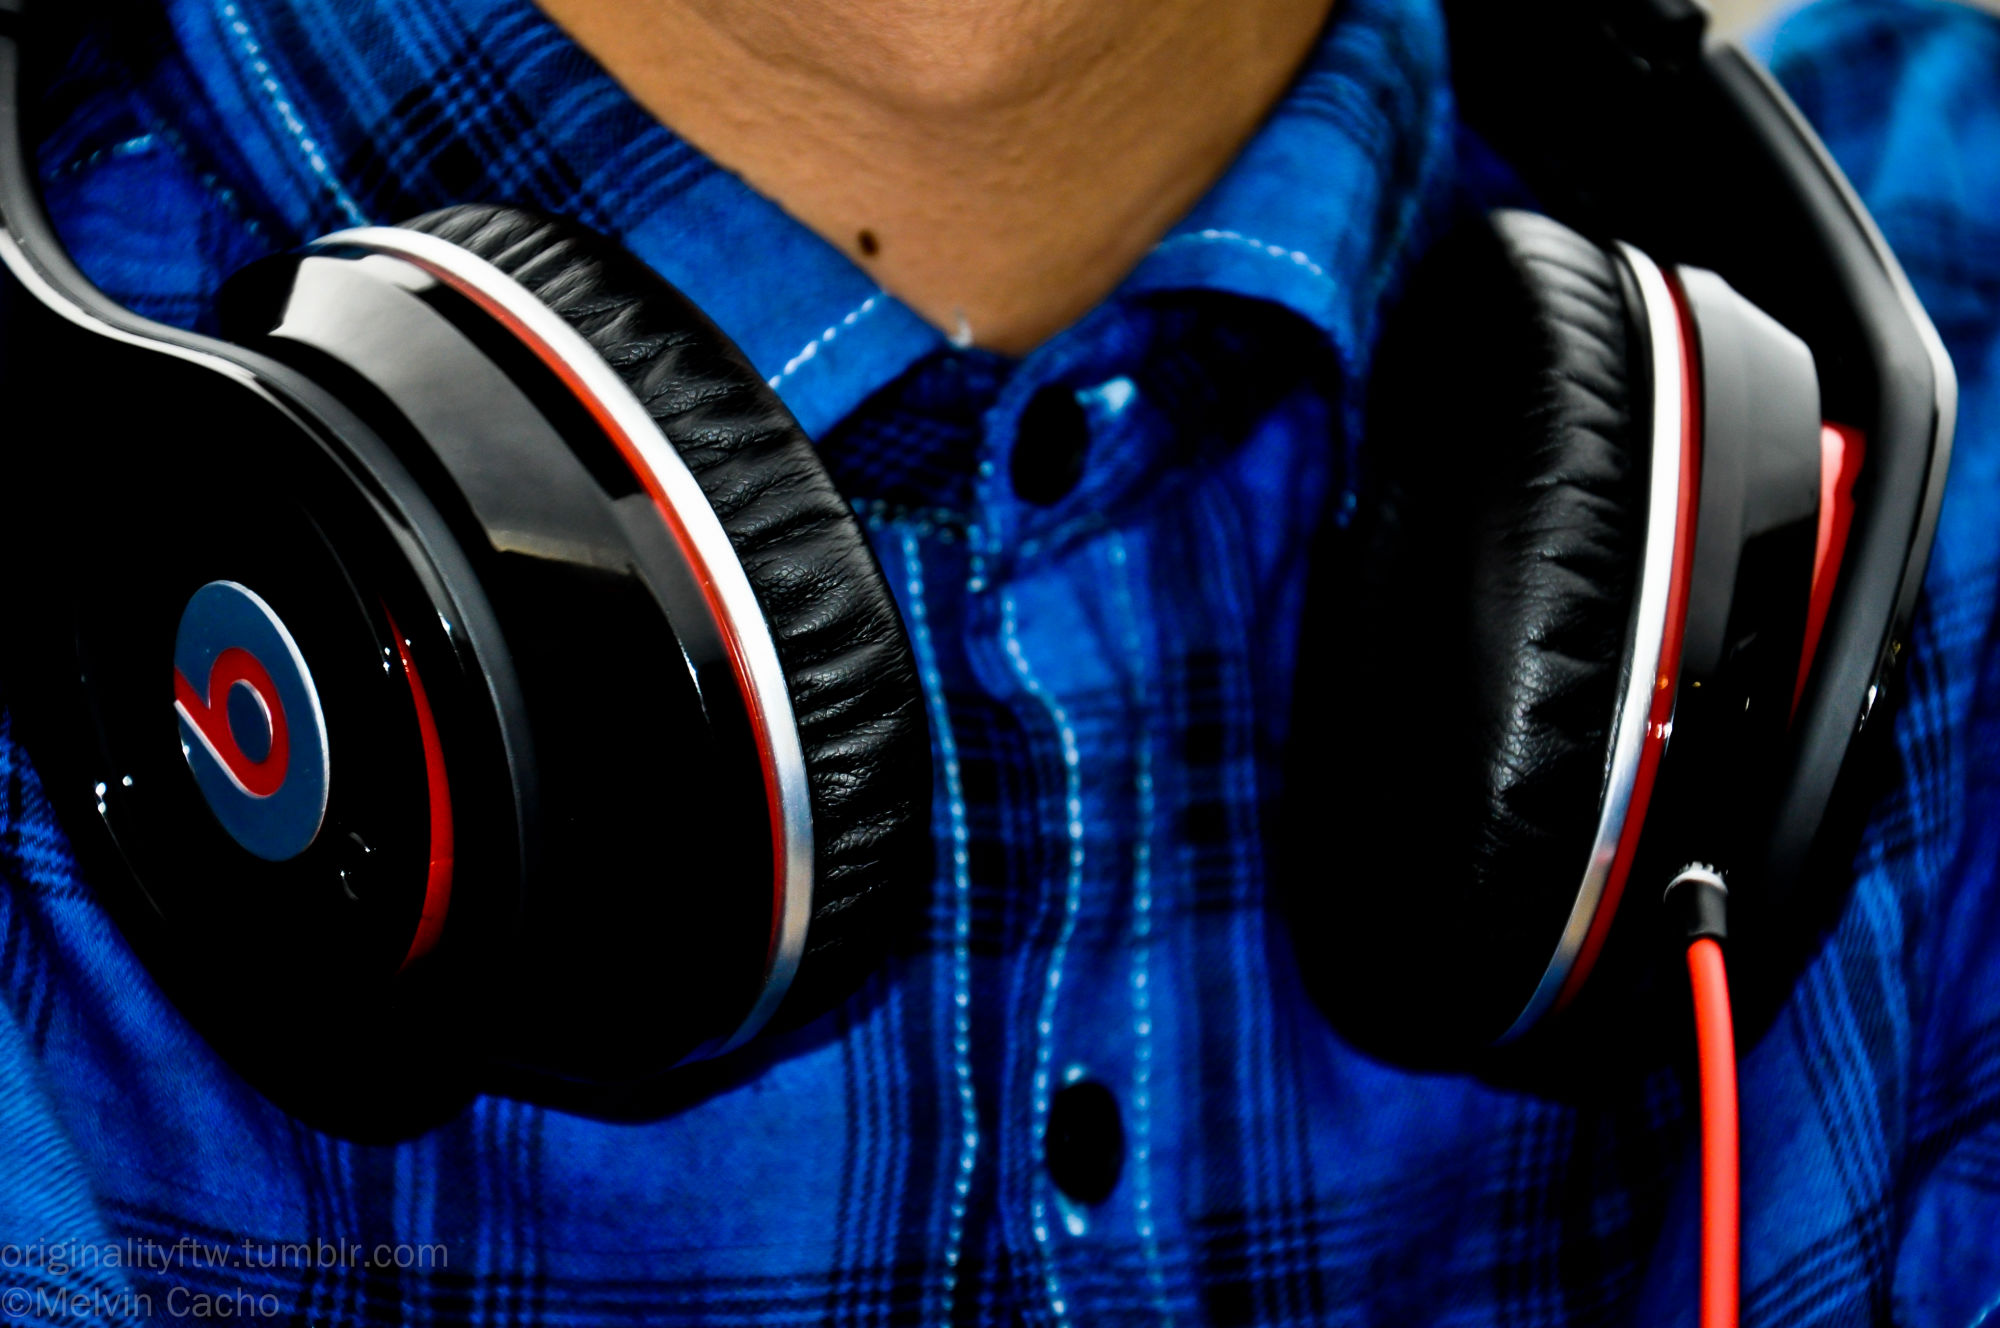 Forget Real-Time Content, Beats By Dre Can Predict the Future